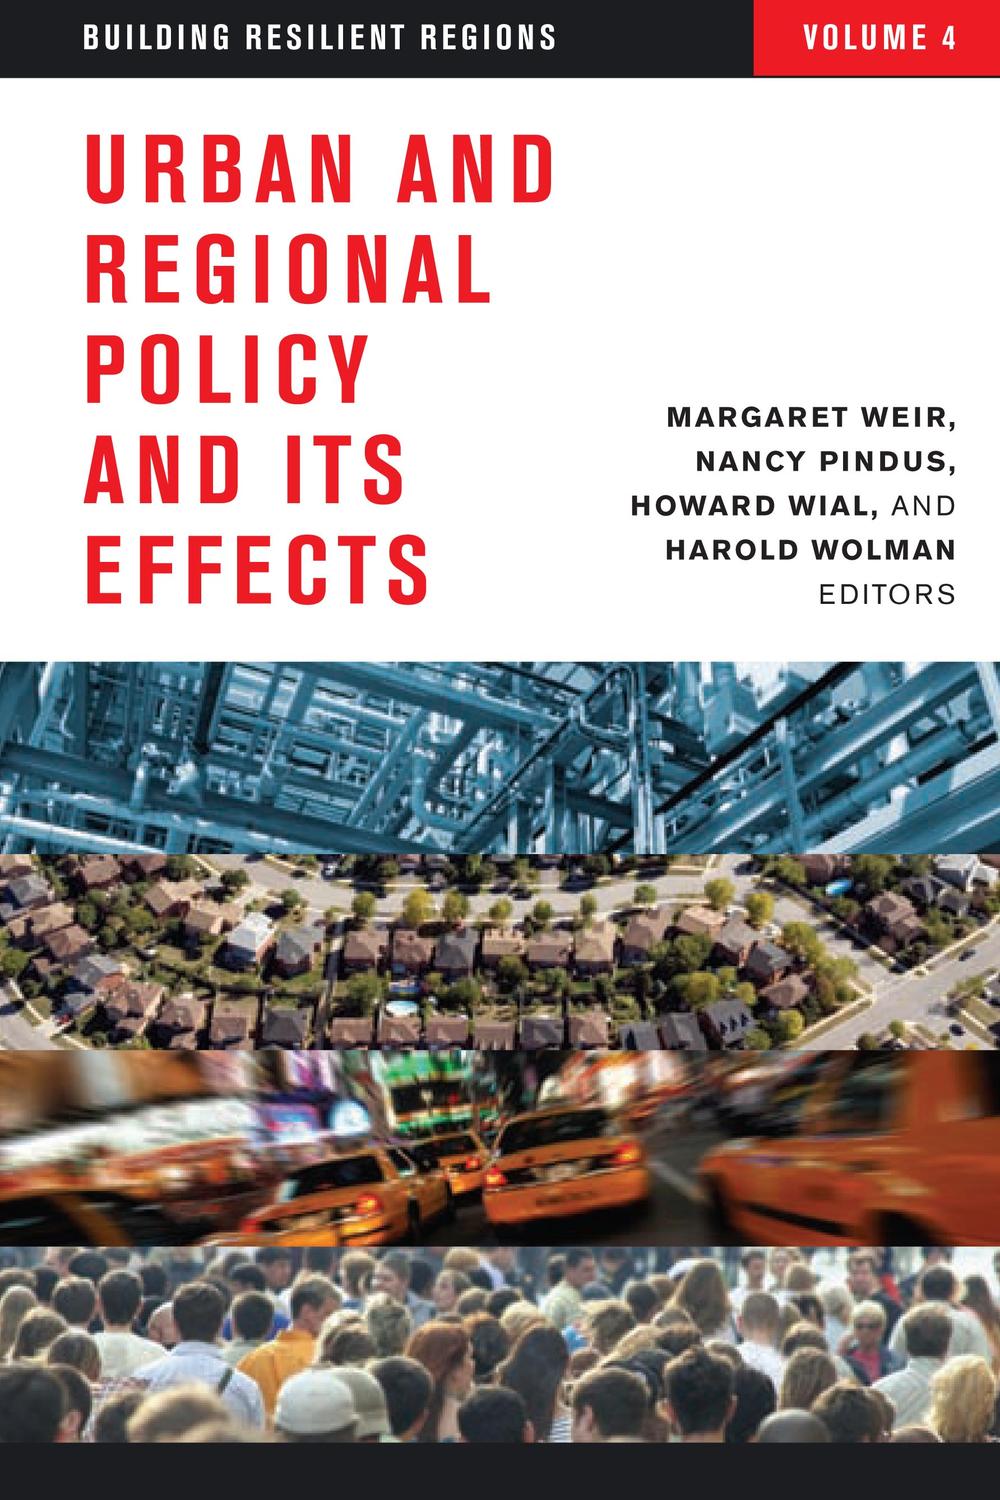 Urban and Regional Policy and Its Effects - Margaret Weir, Nancy Pindus, Howard Wial, Harold Wolman